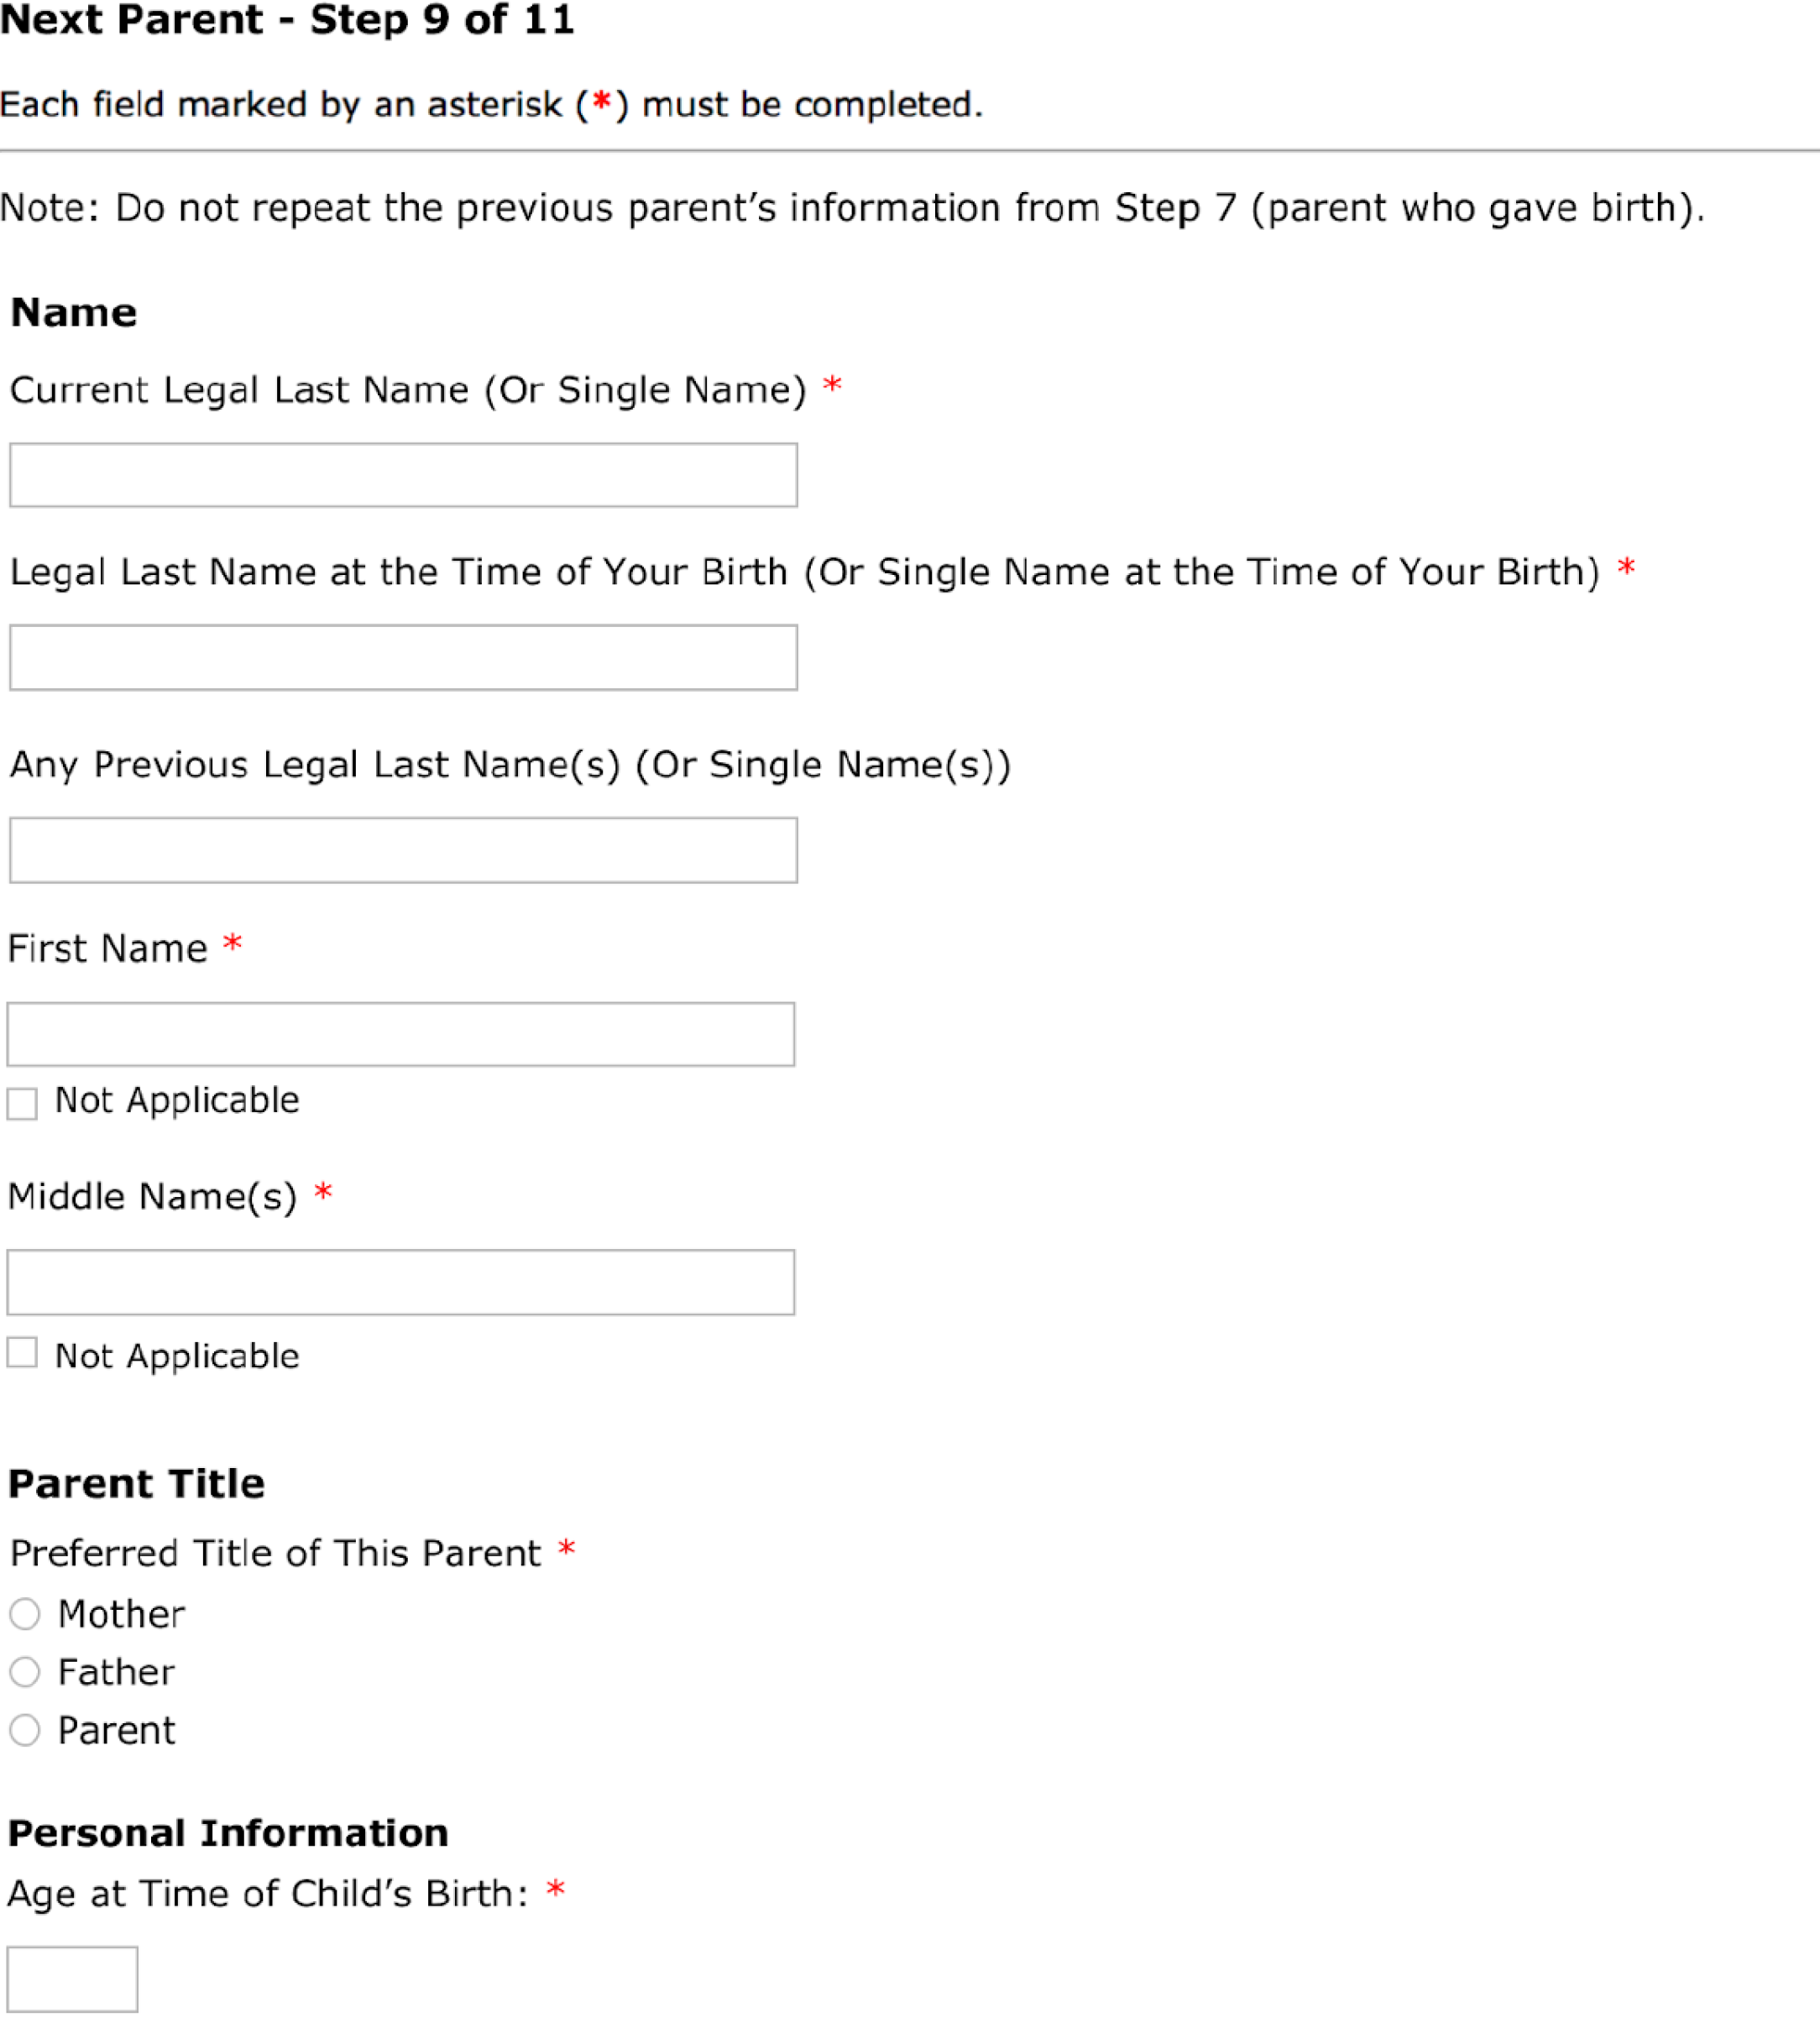 Section called Next parent. Note: do not repeat the previous parent's information from Step 7 (parent who gave birth)